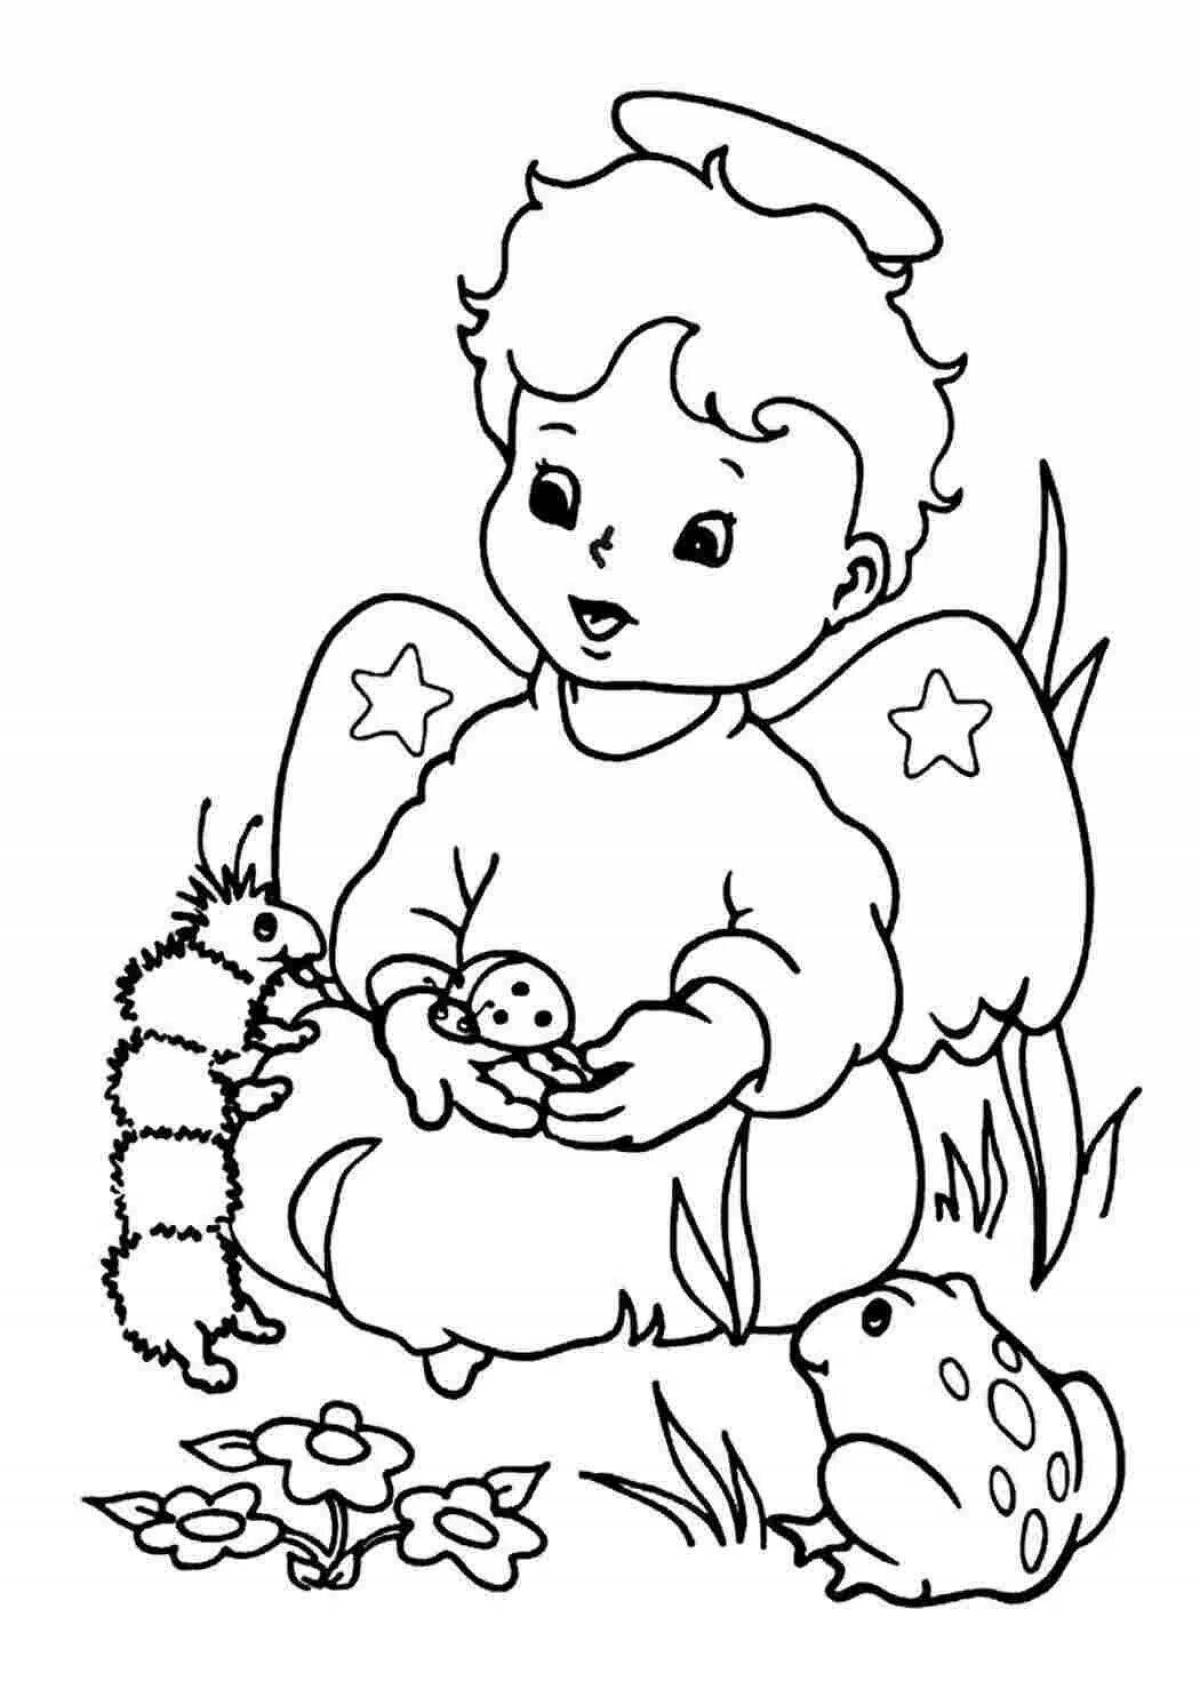 Great angel coloring book for kids